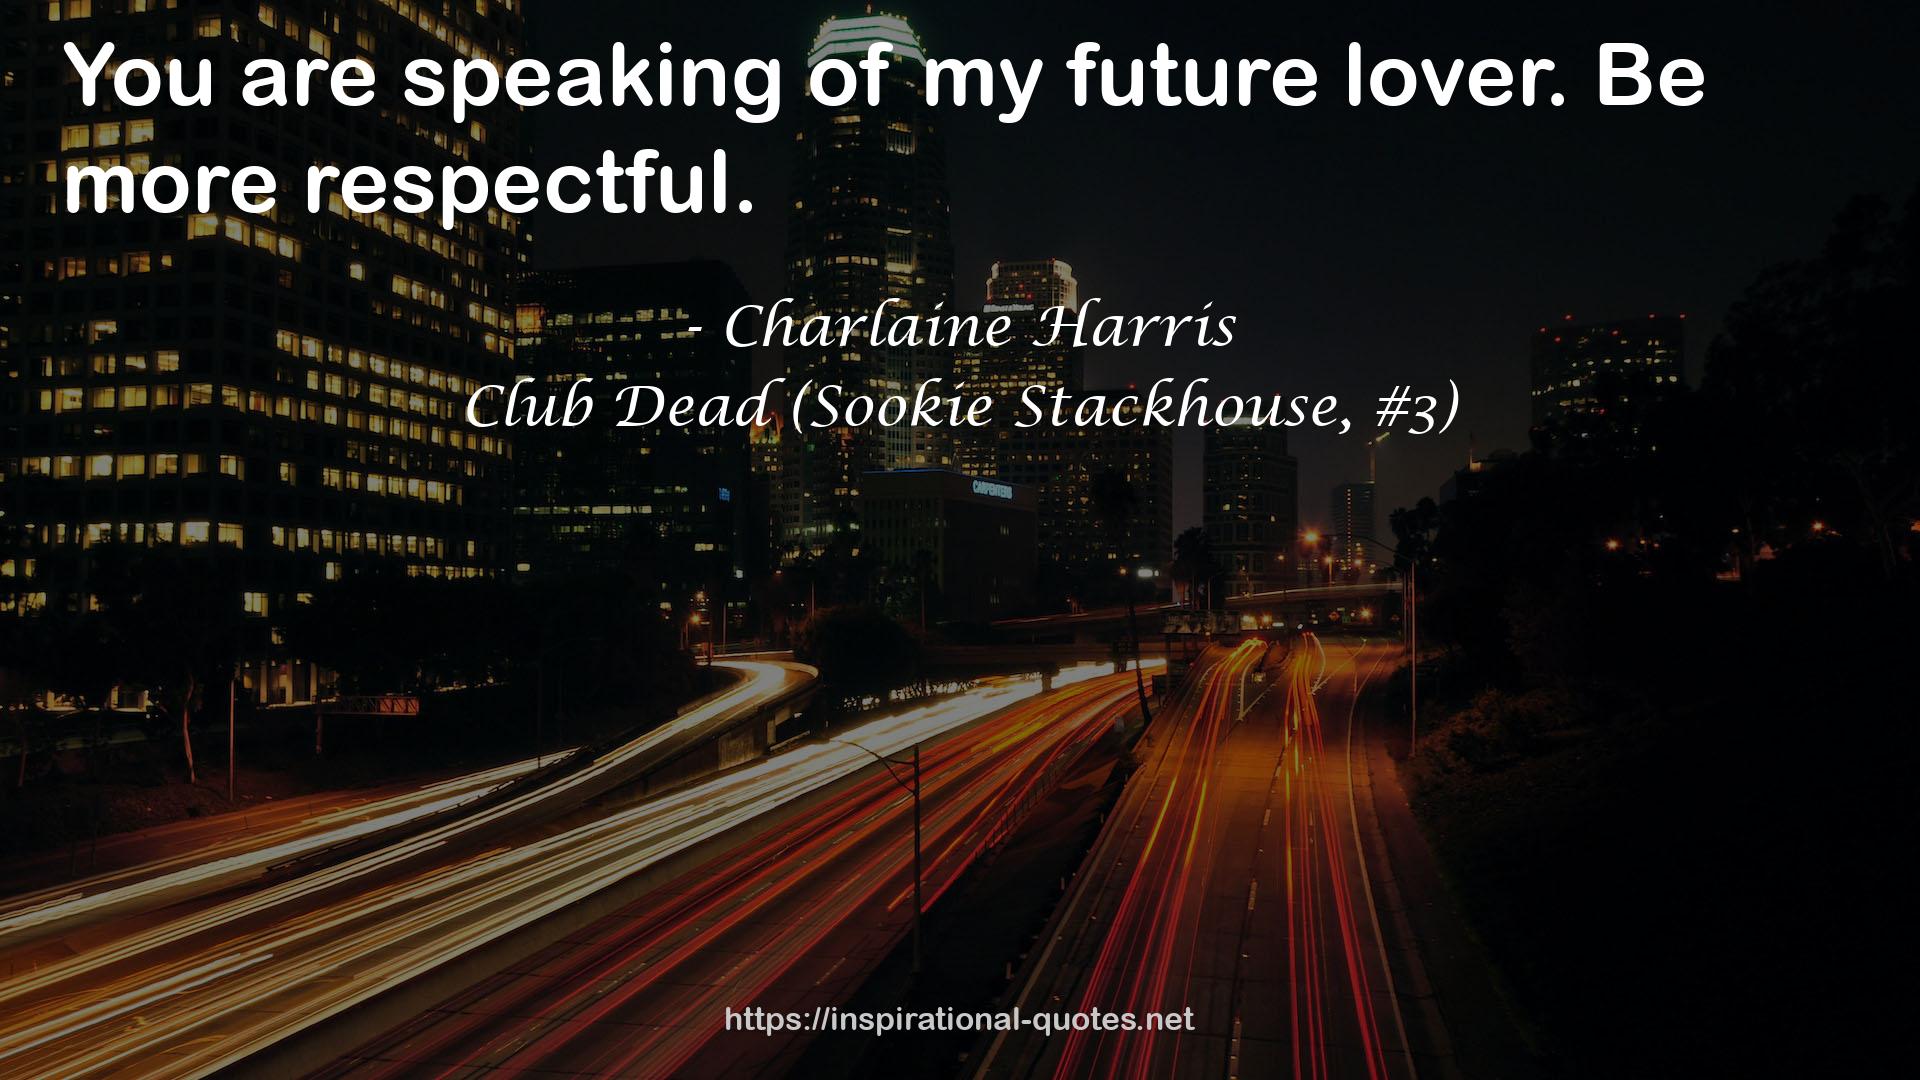 Club Dead (Sookie Stackhouse, #3) QUOTES